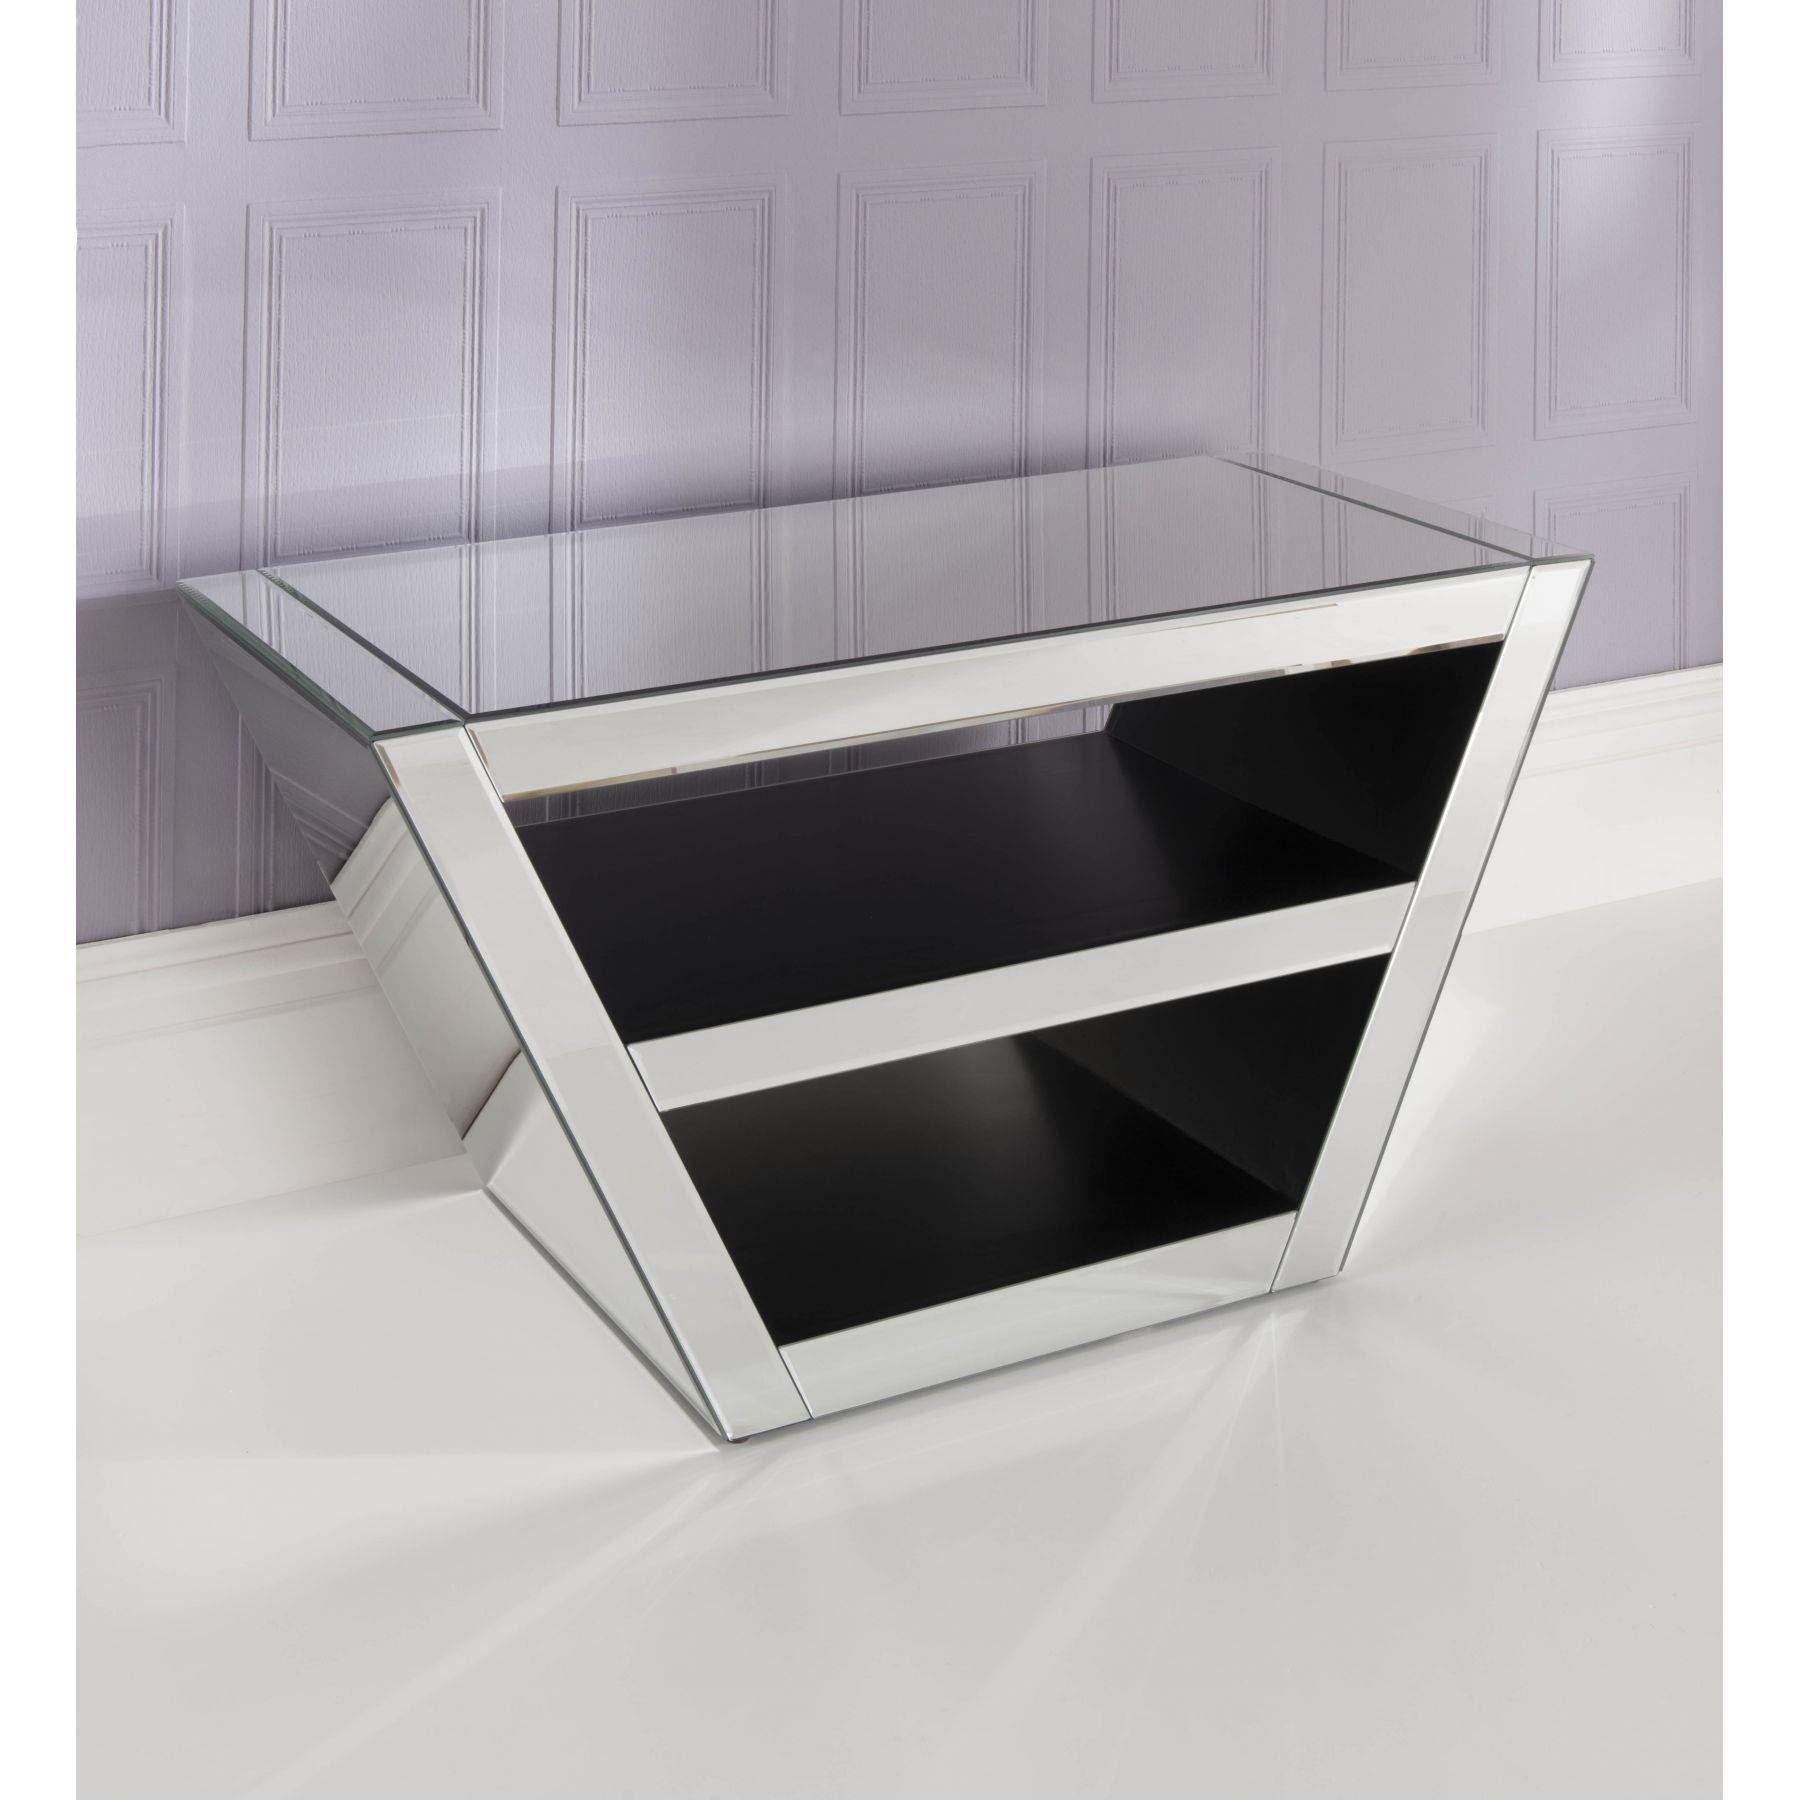 Mirrored Tv Cabinet | Venetian Glass Tv Stand | Homesdirect365 Throughout Mirrored Tv Cabinets Furniture (View 1 of 15)